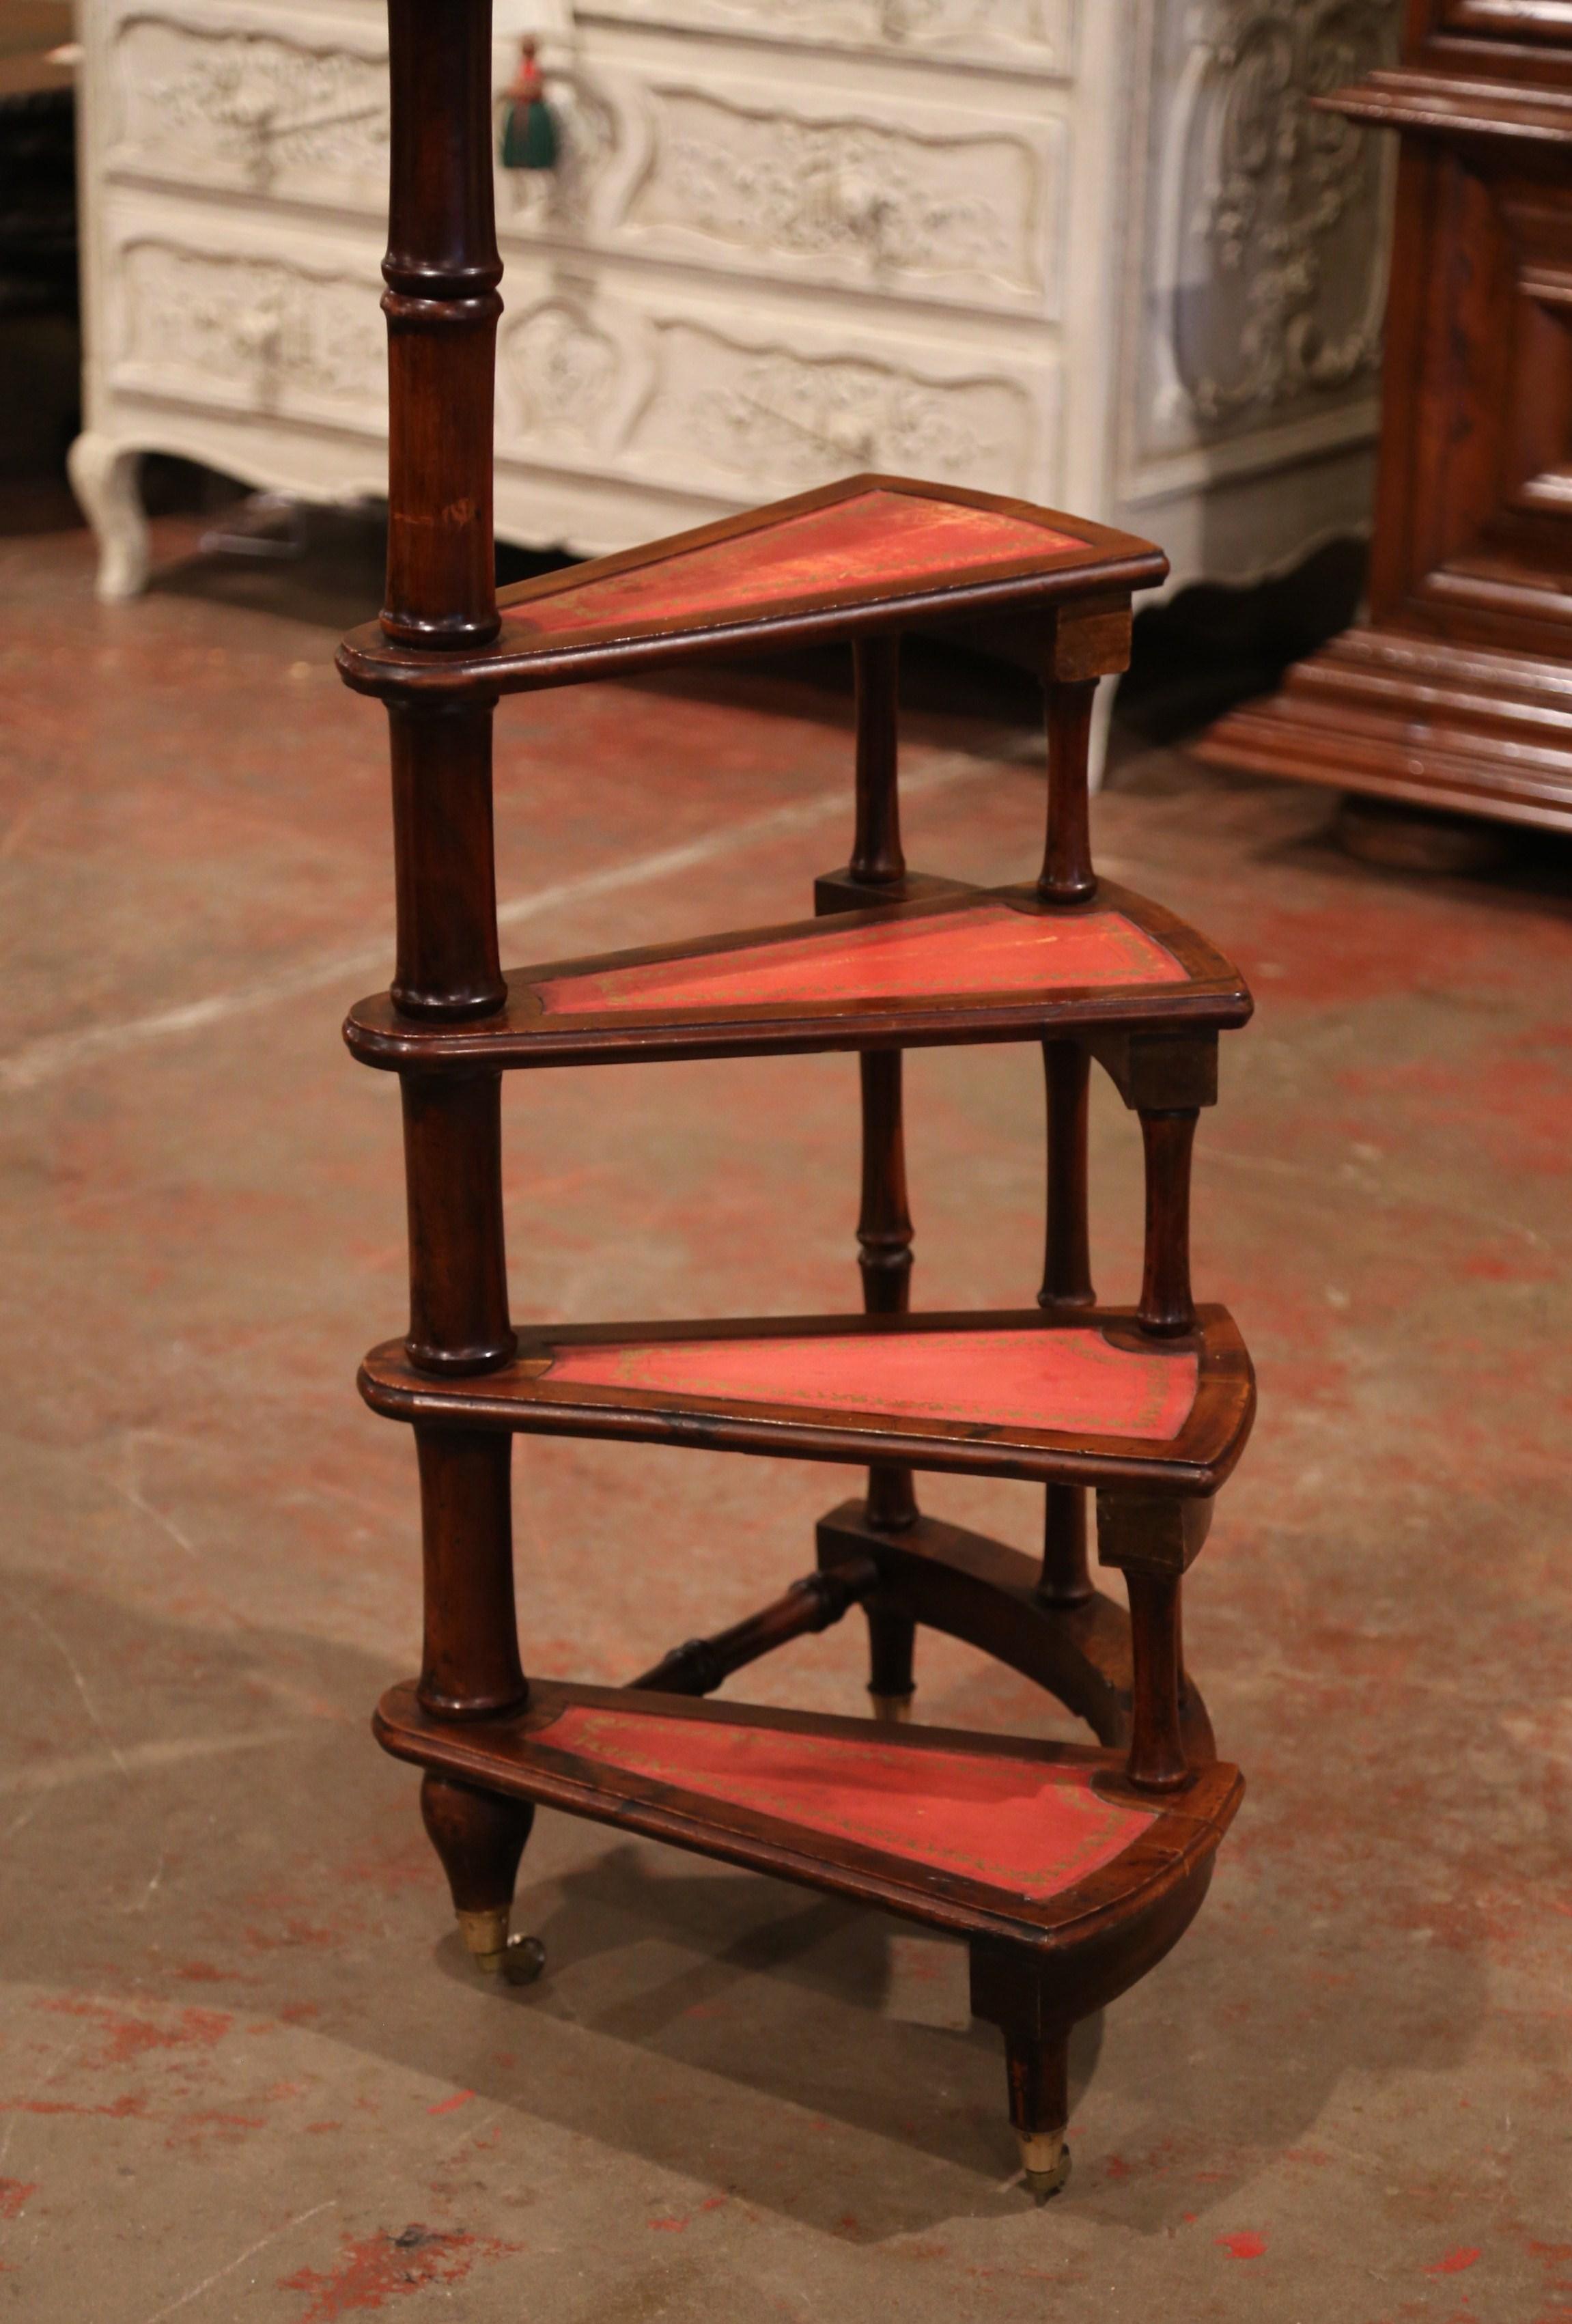 Created in England circa 1980 and standing on four turned legs with bottom wheels, the tall circular step ladder features four stairs rolled around a turned, central post embellished with a decorative brass finial at the pediment. Each step is